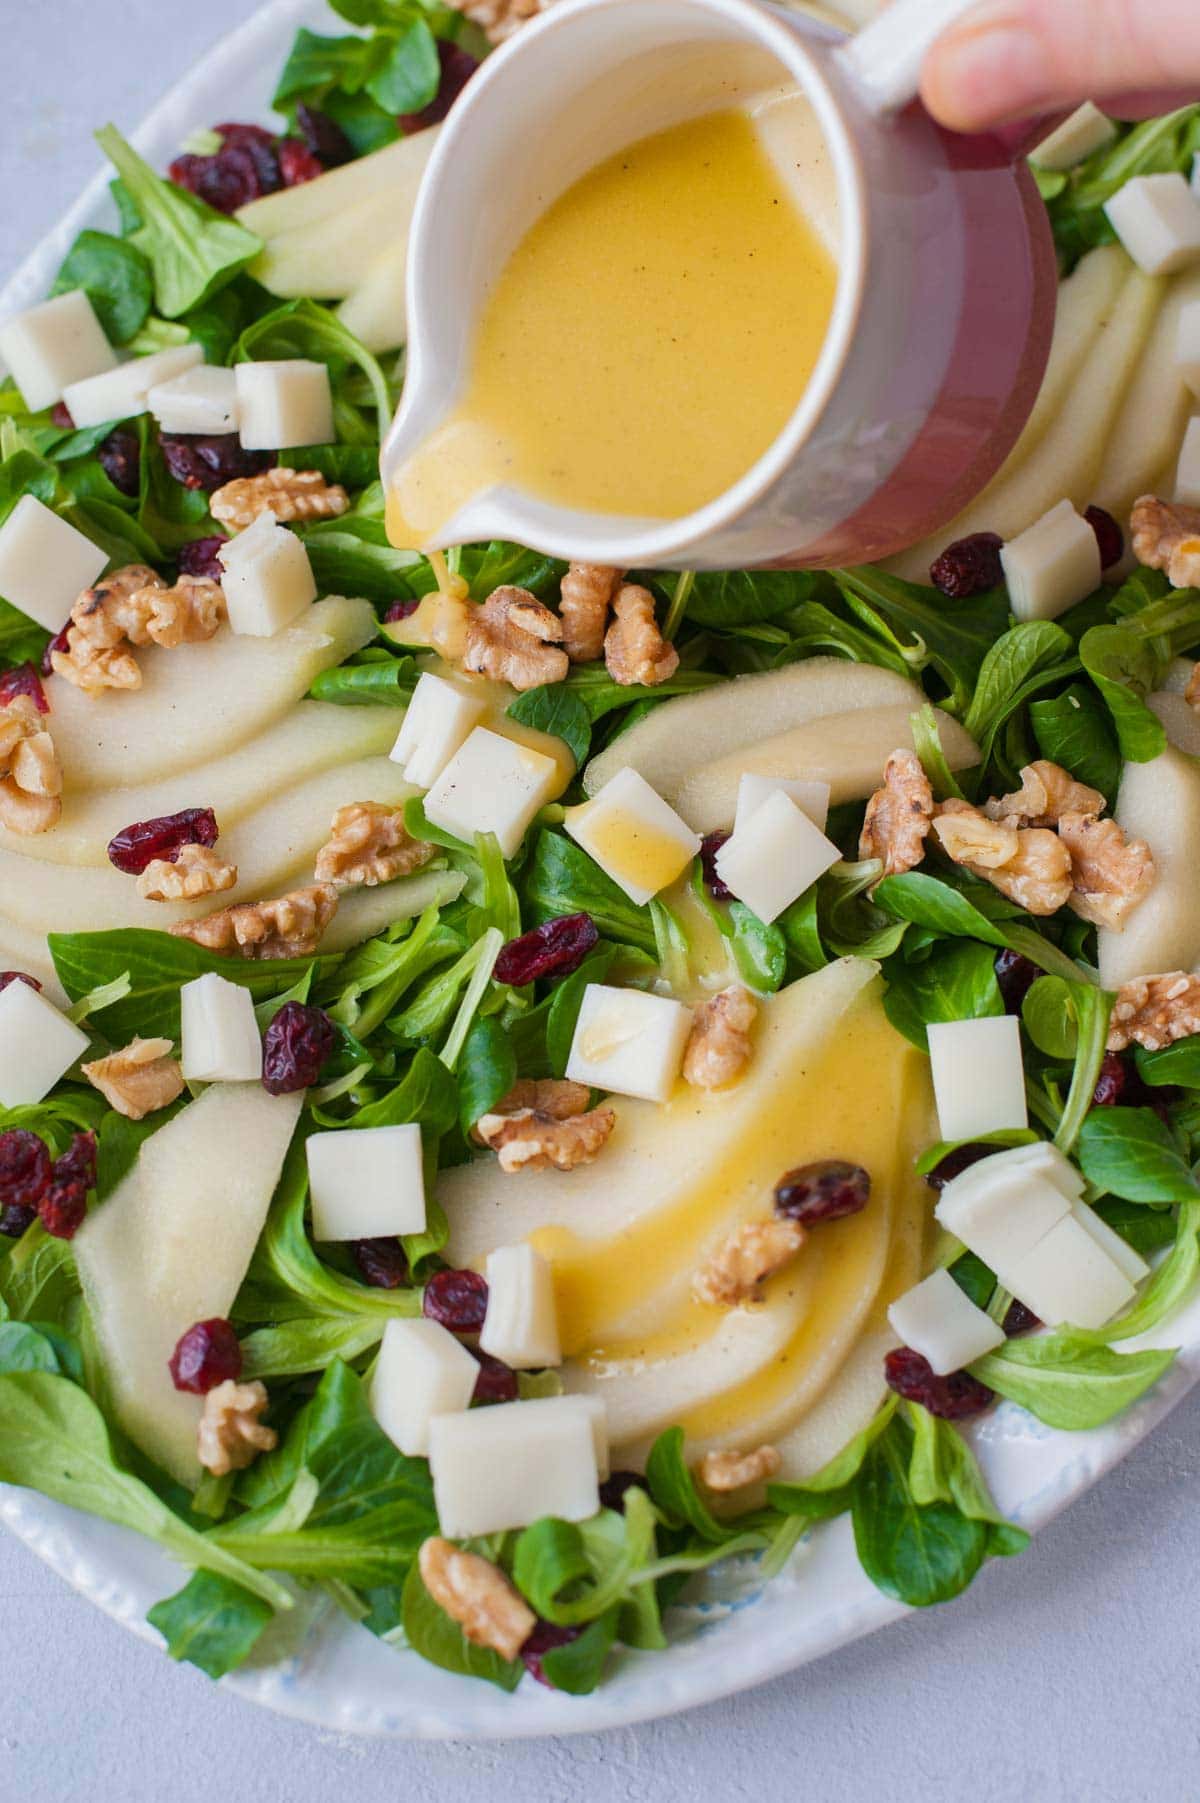 Pear walnut salad with cranberries and goat cheese - Everyday Delicious